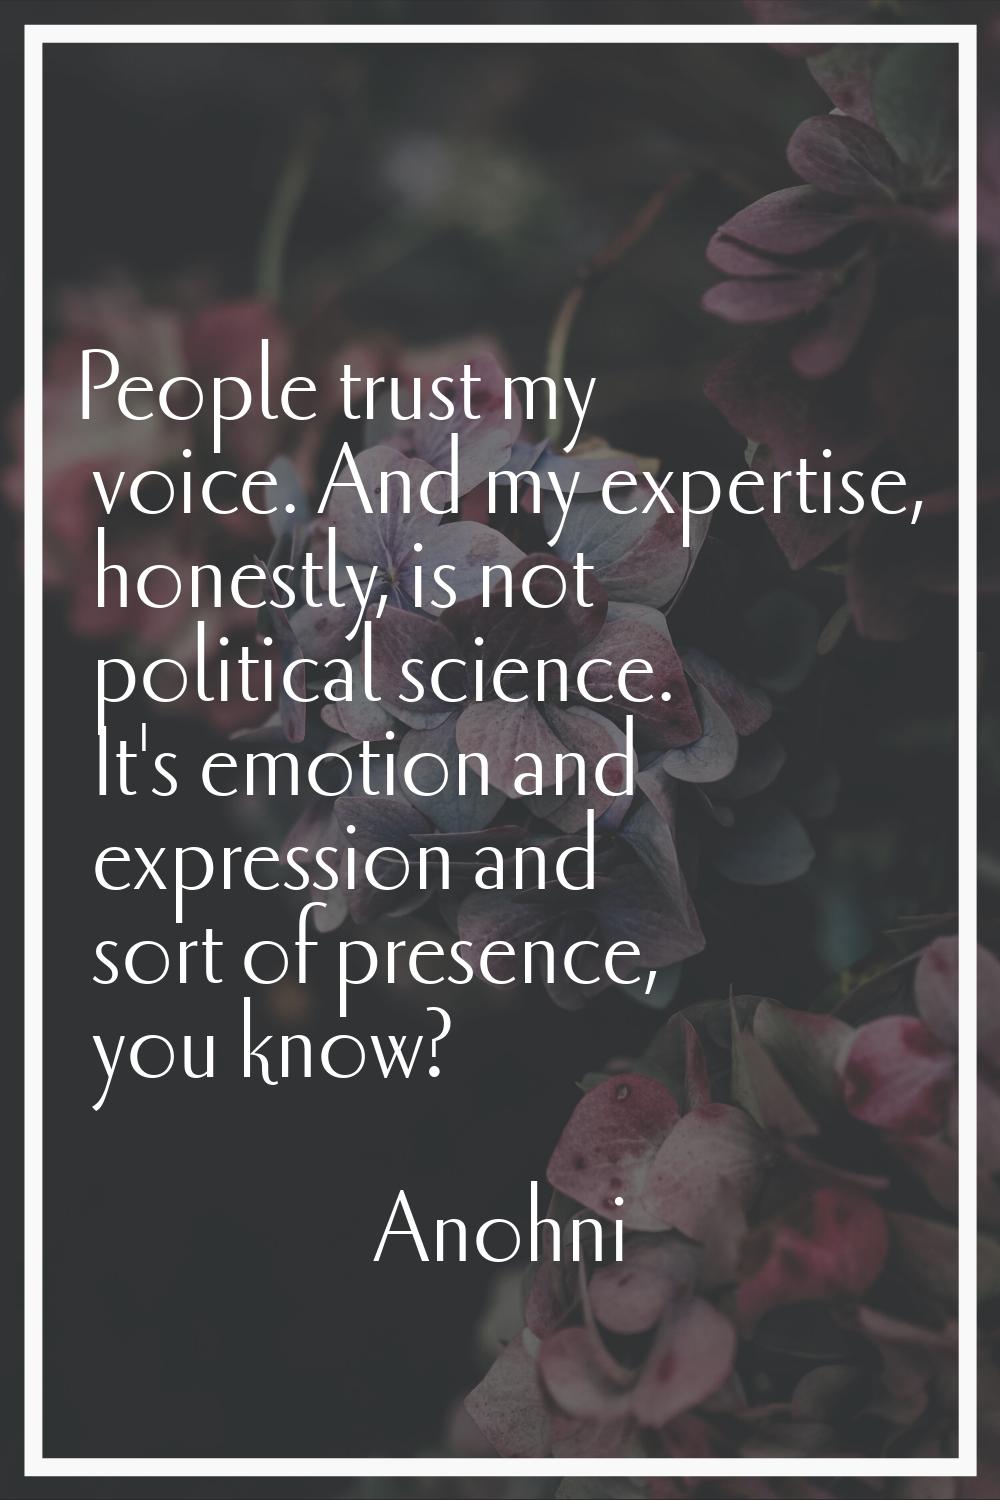 People trust my voice. And my expertise, honestly, is not political science. It's emotion and expre